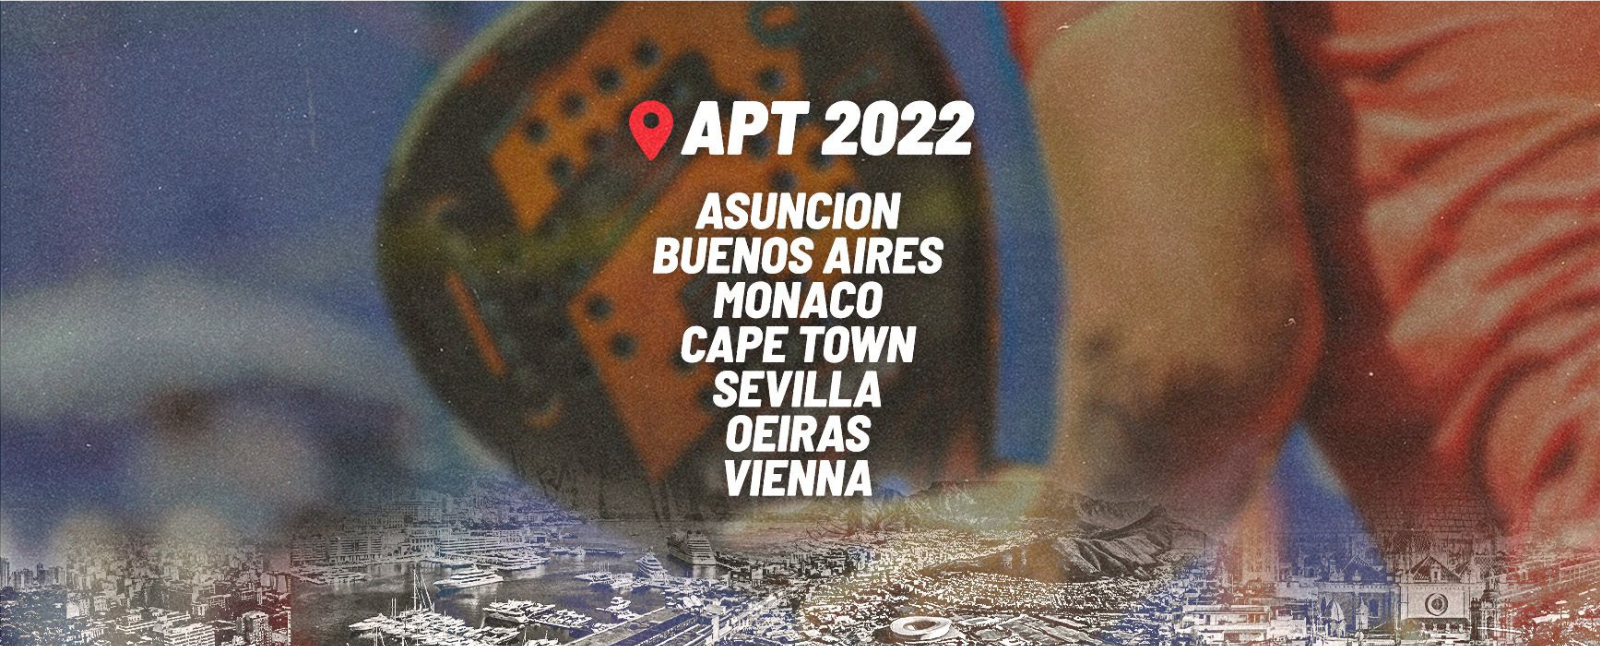 The spectacular schedule of the APT Padel Tour for 2022